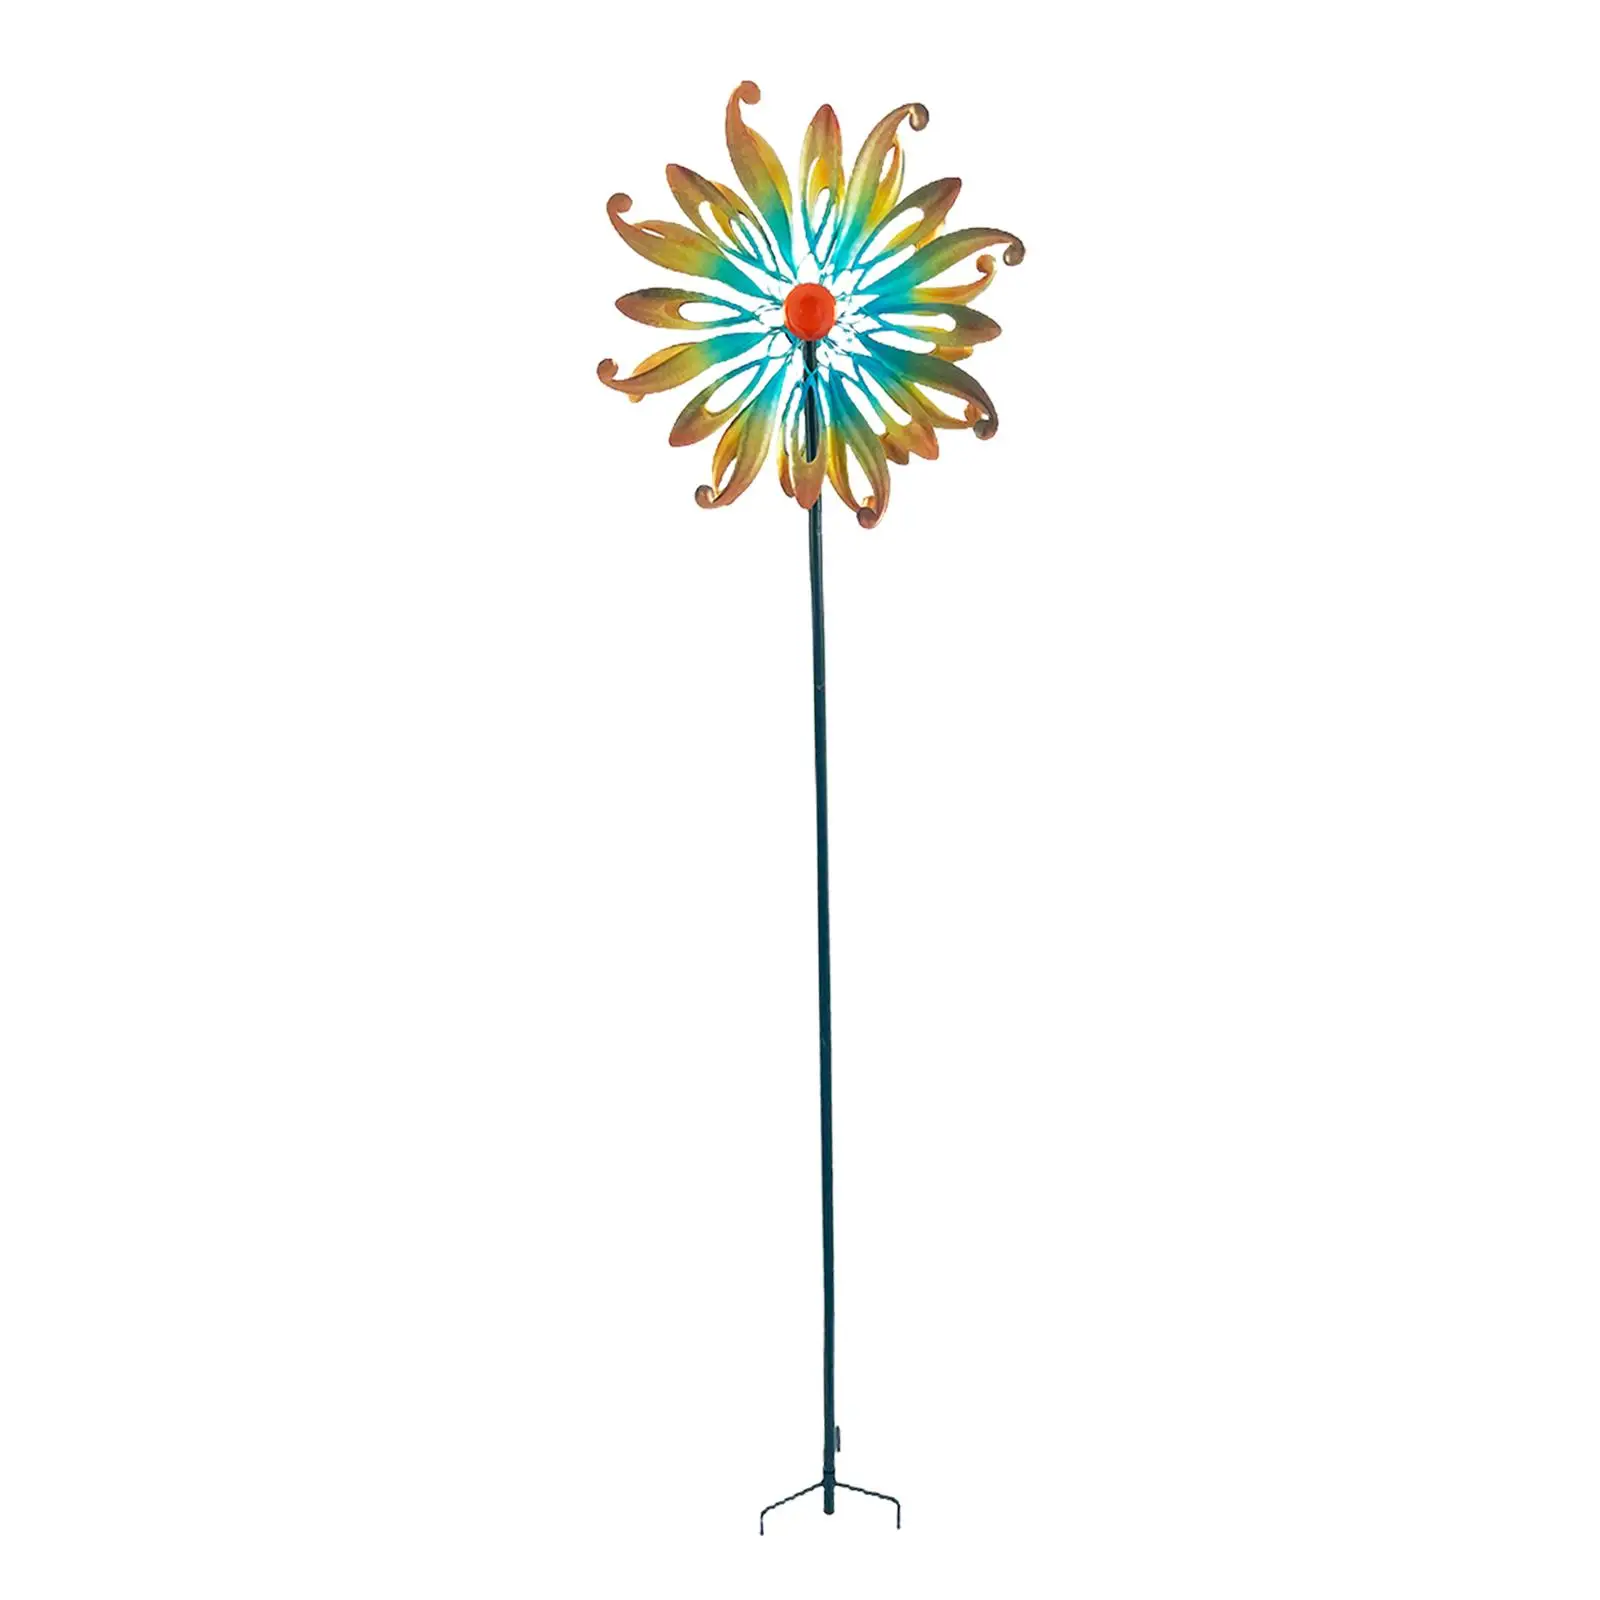 Wind Decorative Colorful Weatherproof Double Side Stake Vertical Iron Wind Catcher Windmill for Garden Patio Yard Outdoor Decor